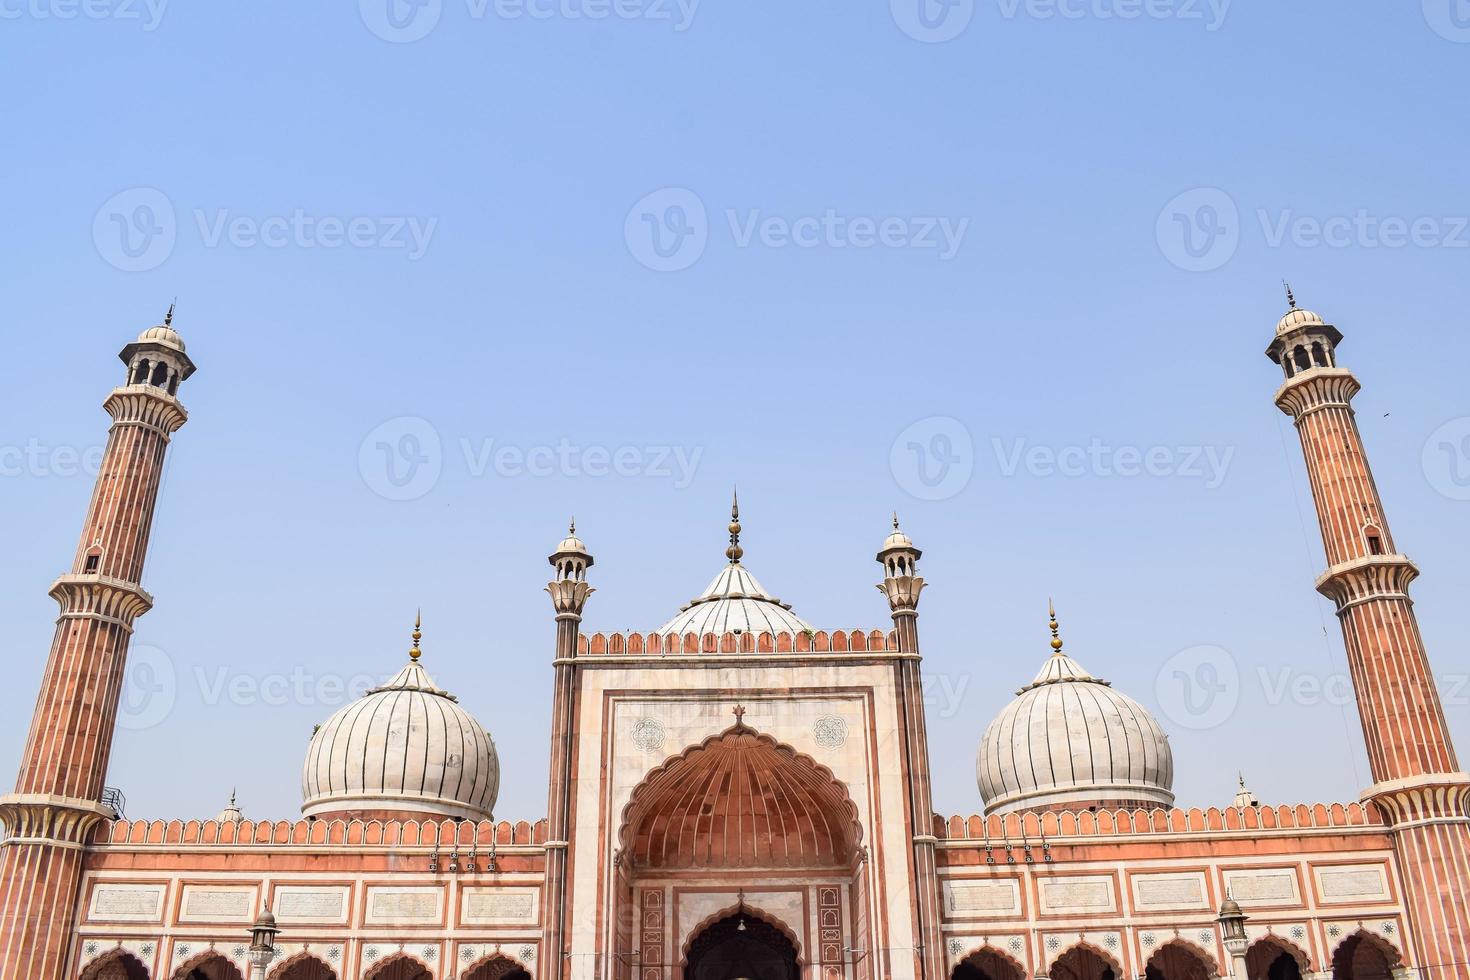 Architectural detail of Jama Masjid Mosque, Old Delhi, India, The spectacular architecture of the Great Friday Mosque Jama Masjid in Delhi 6 during Ramzan season, the most important Mosque in India photo